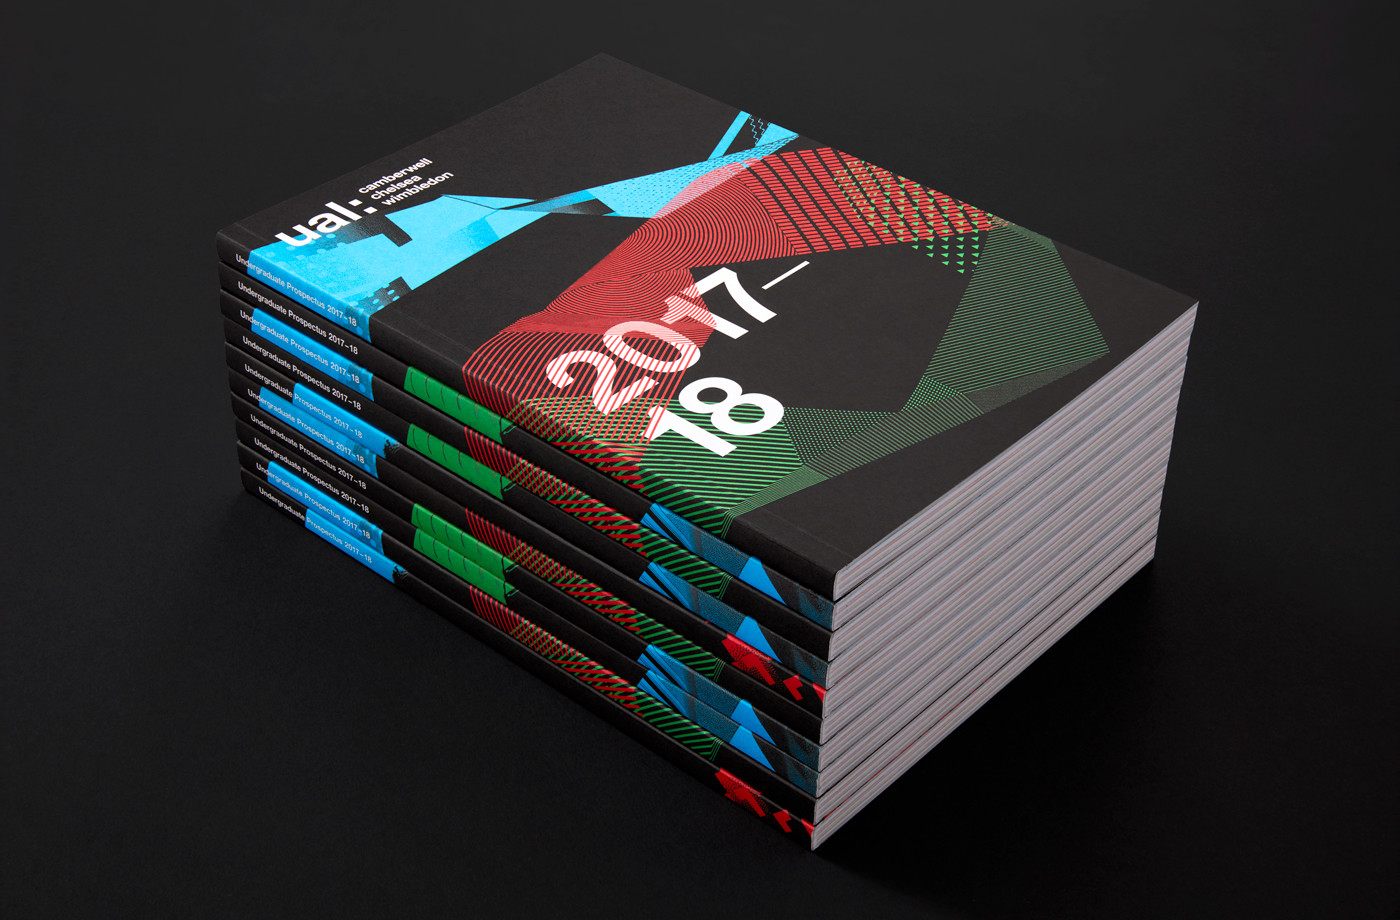 Brochures by Spy for the University of the Arts London 2016–17 campaign